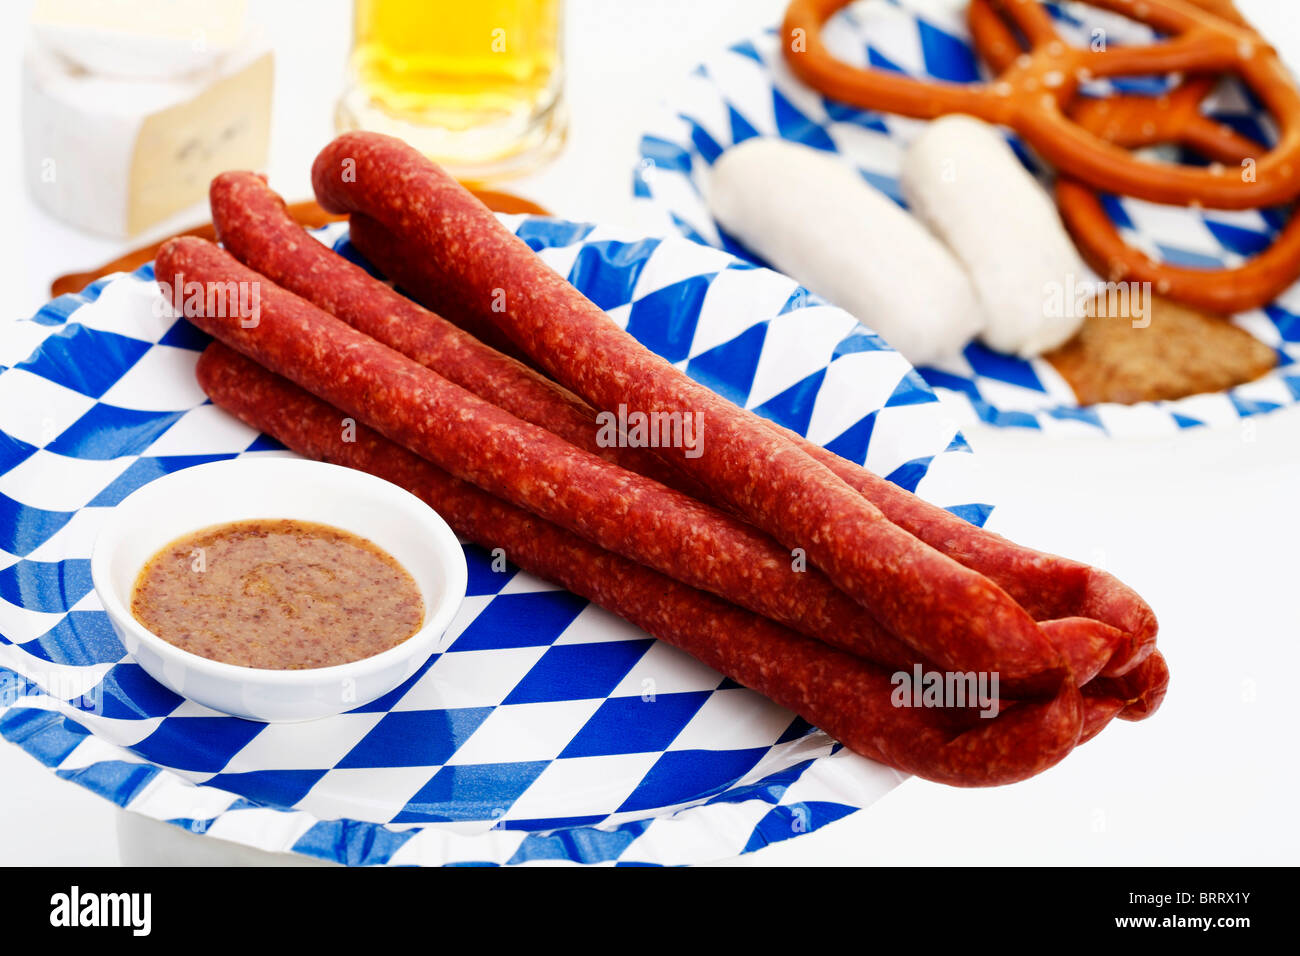 Ham Mettwurst sausages with sweet mustard, veal sausages, salted pretzels and beer, Bavarian Stock Photo